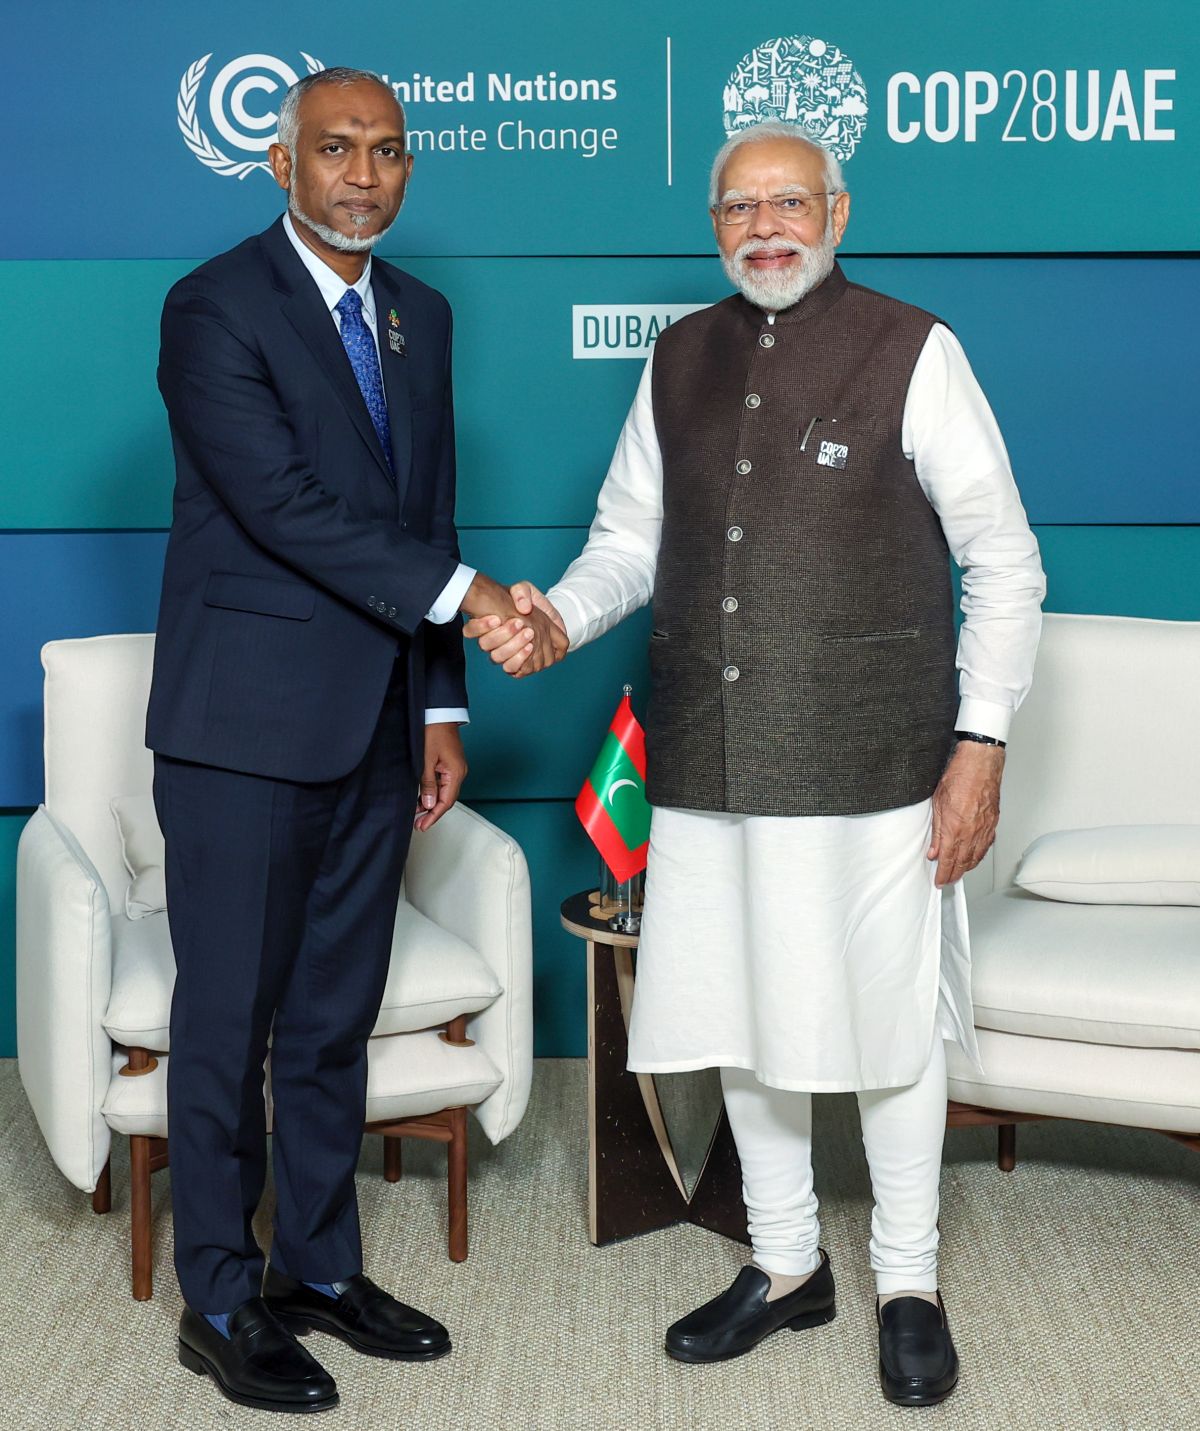 We are friends, but ...: Maldives min on India ties